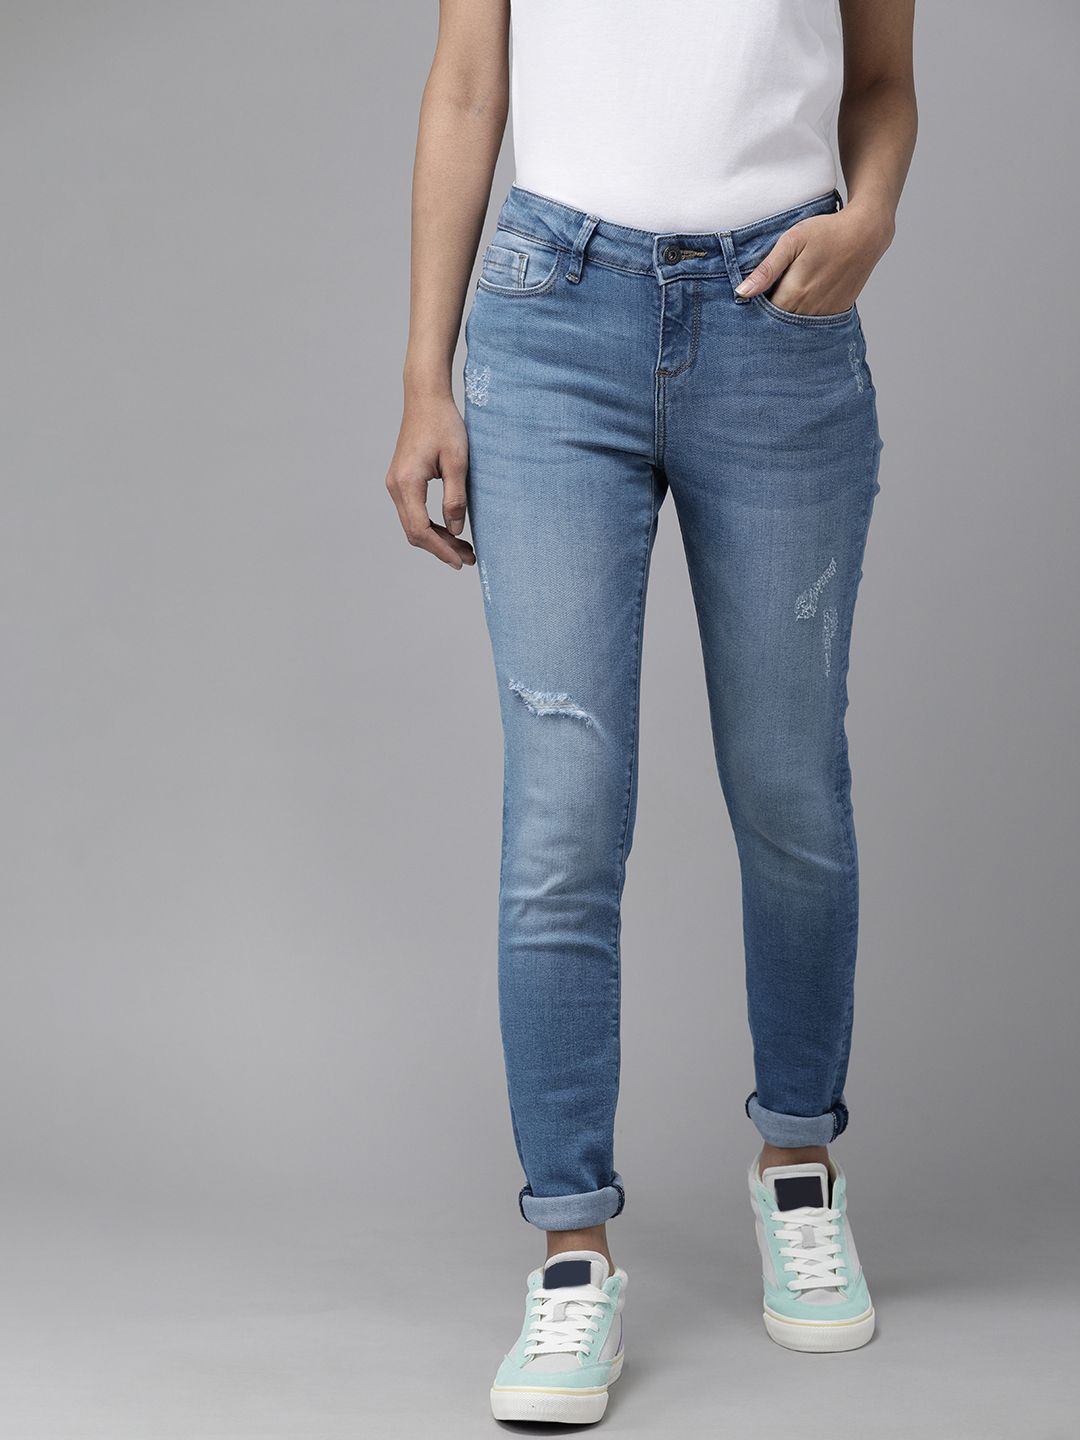 Vero Moda Women Blue Skinny Fit Mildly Distressed Light Fade Mid Rise Stretchable Jeans Price in India